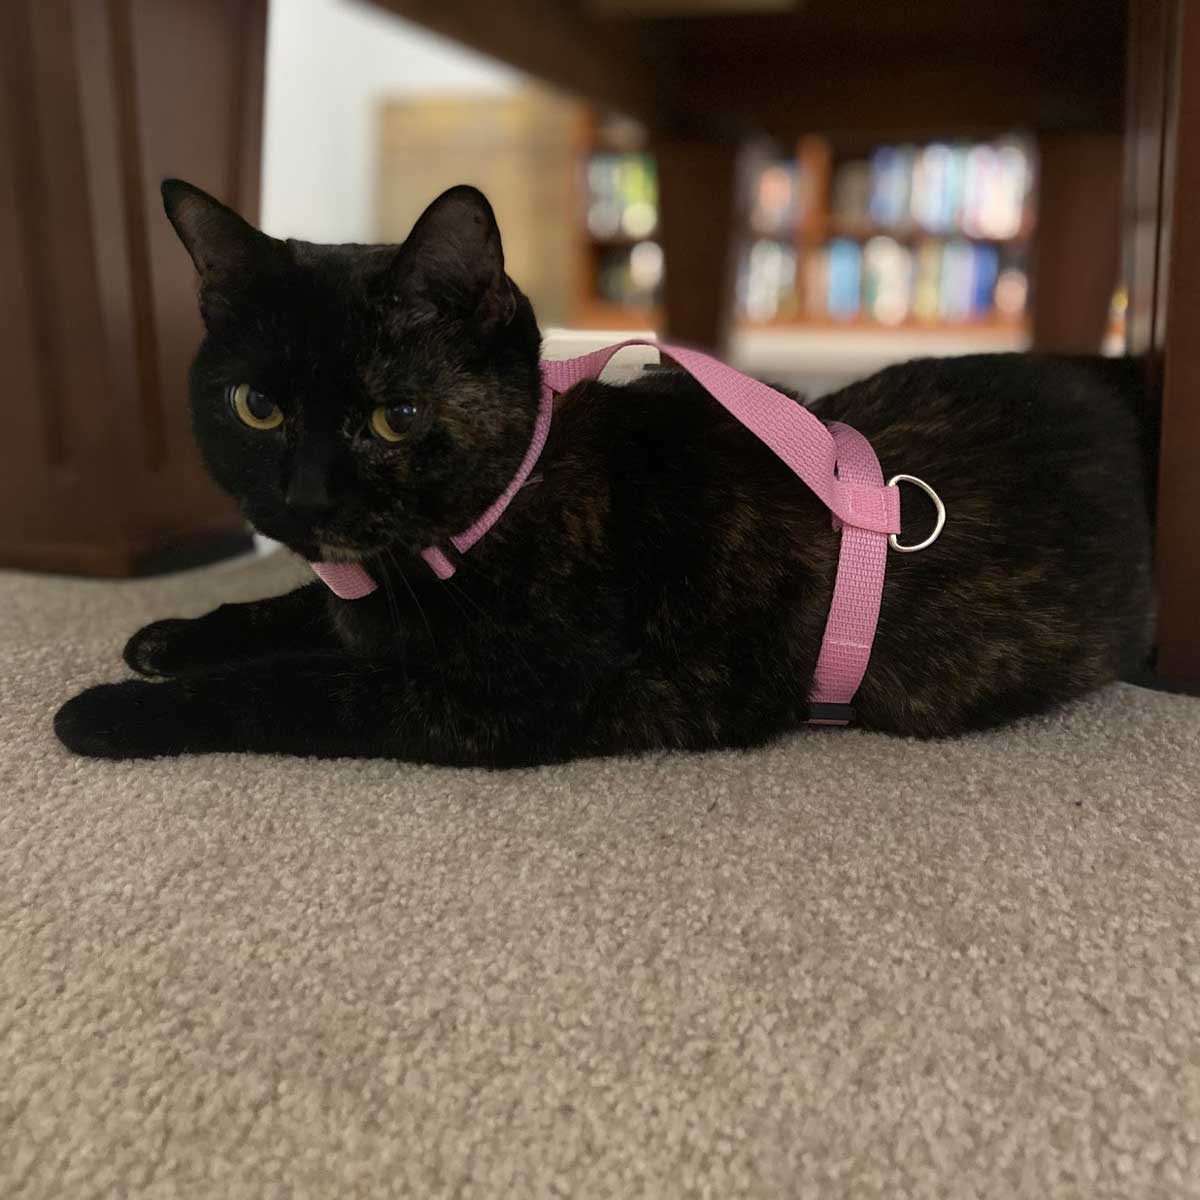 How to Make a Cat Harness